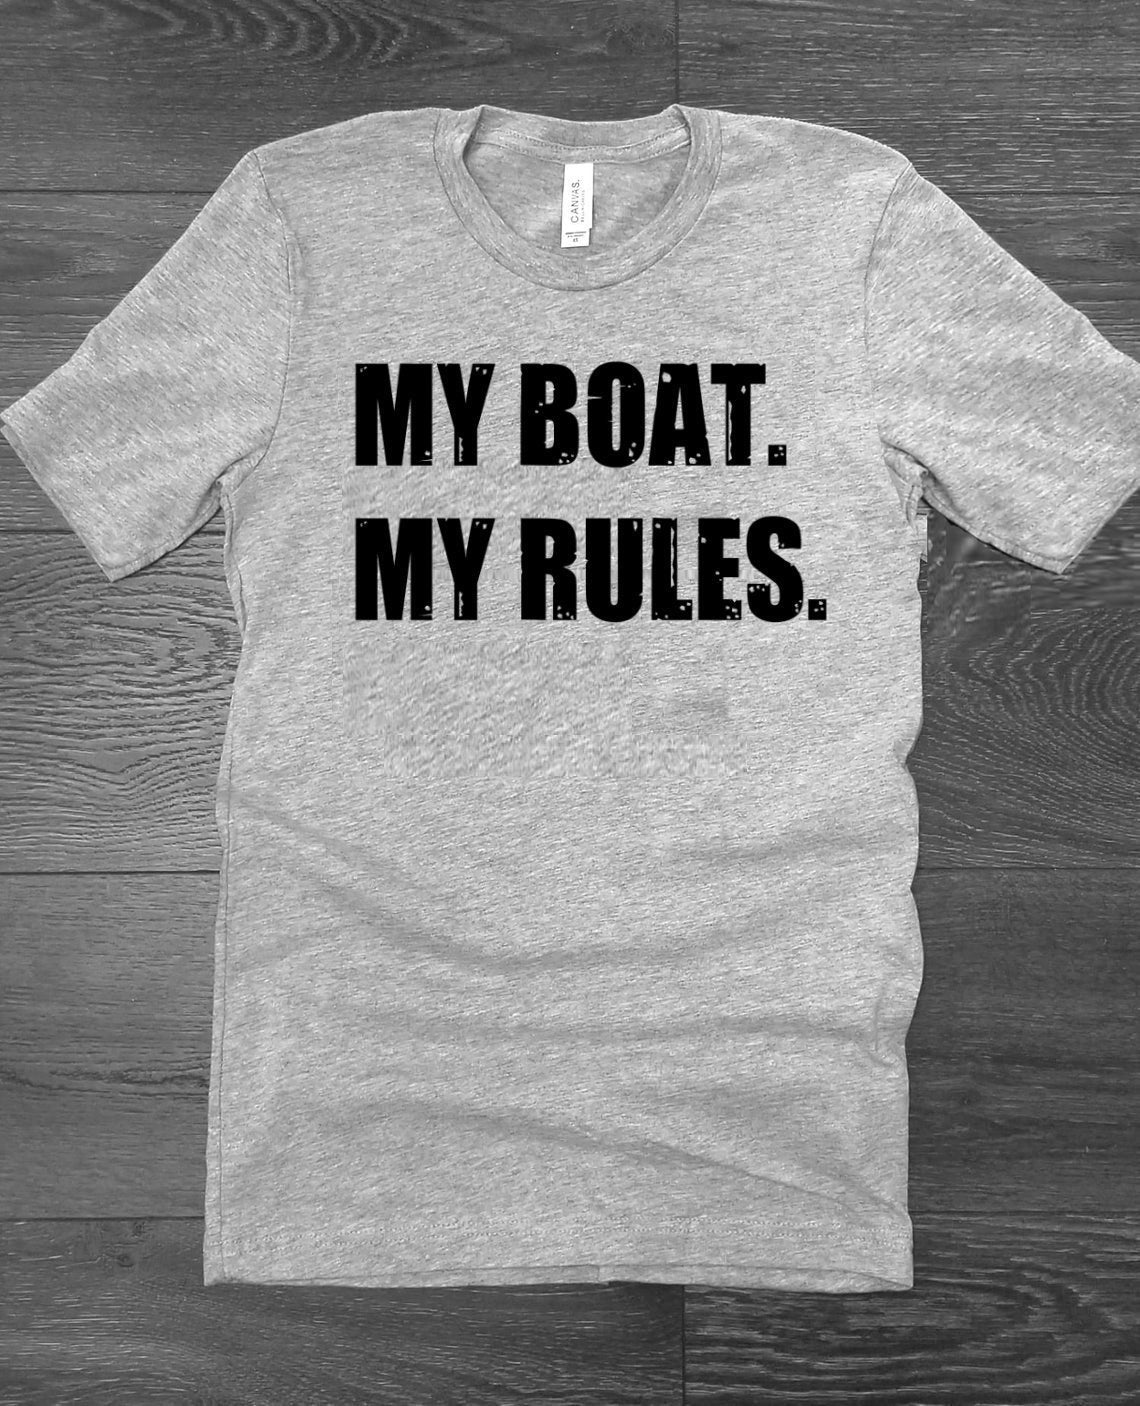 My Boat My Rules Boater Boating Funny Shirt Novelty T-shirt Tee